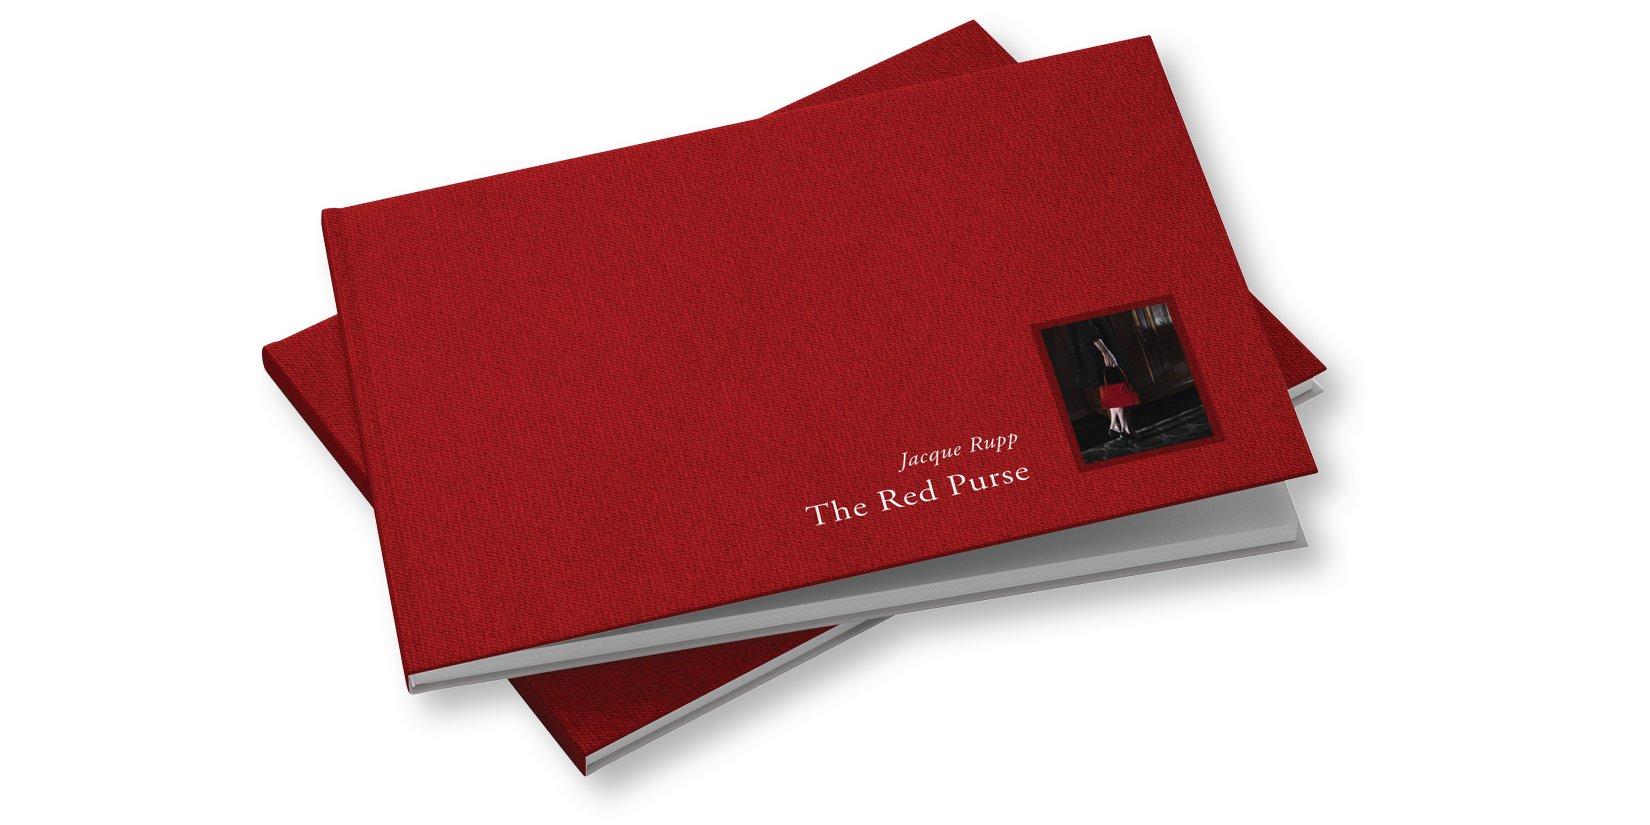 Jacque-Rupp_The-Red-Purse_book-stack.jpg